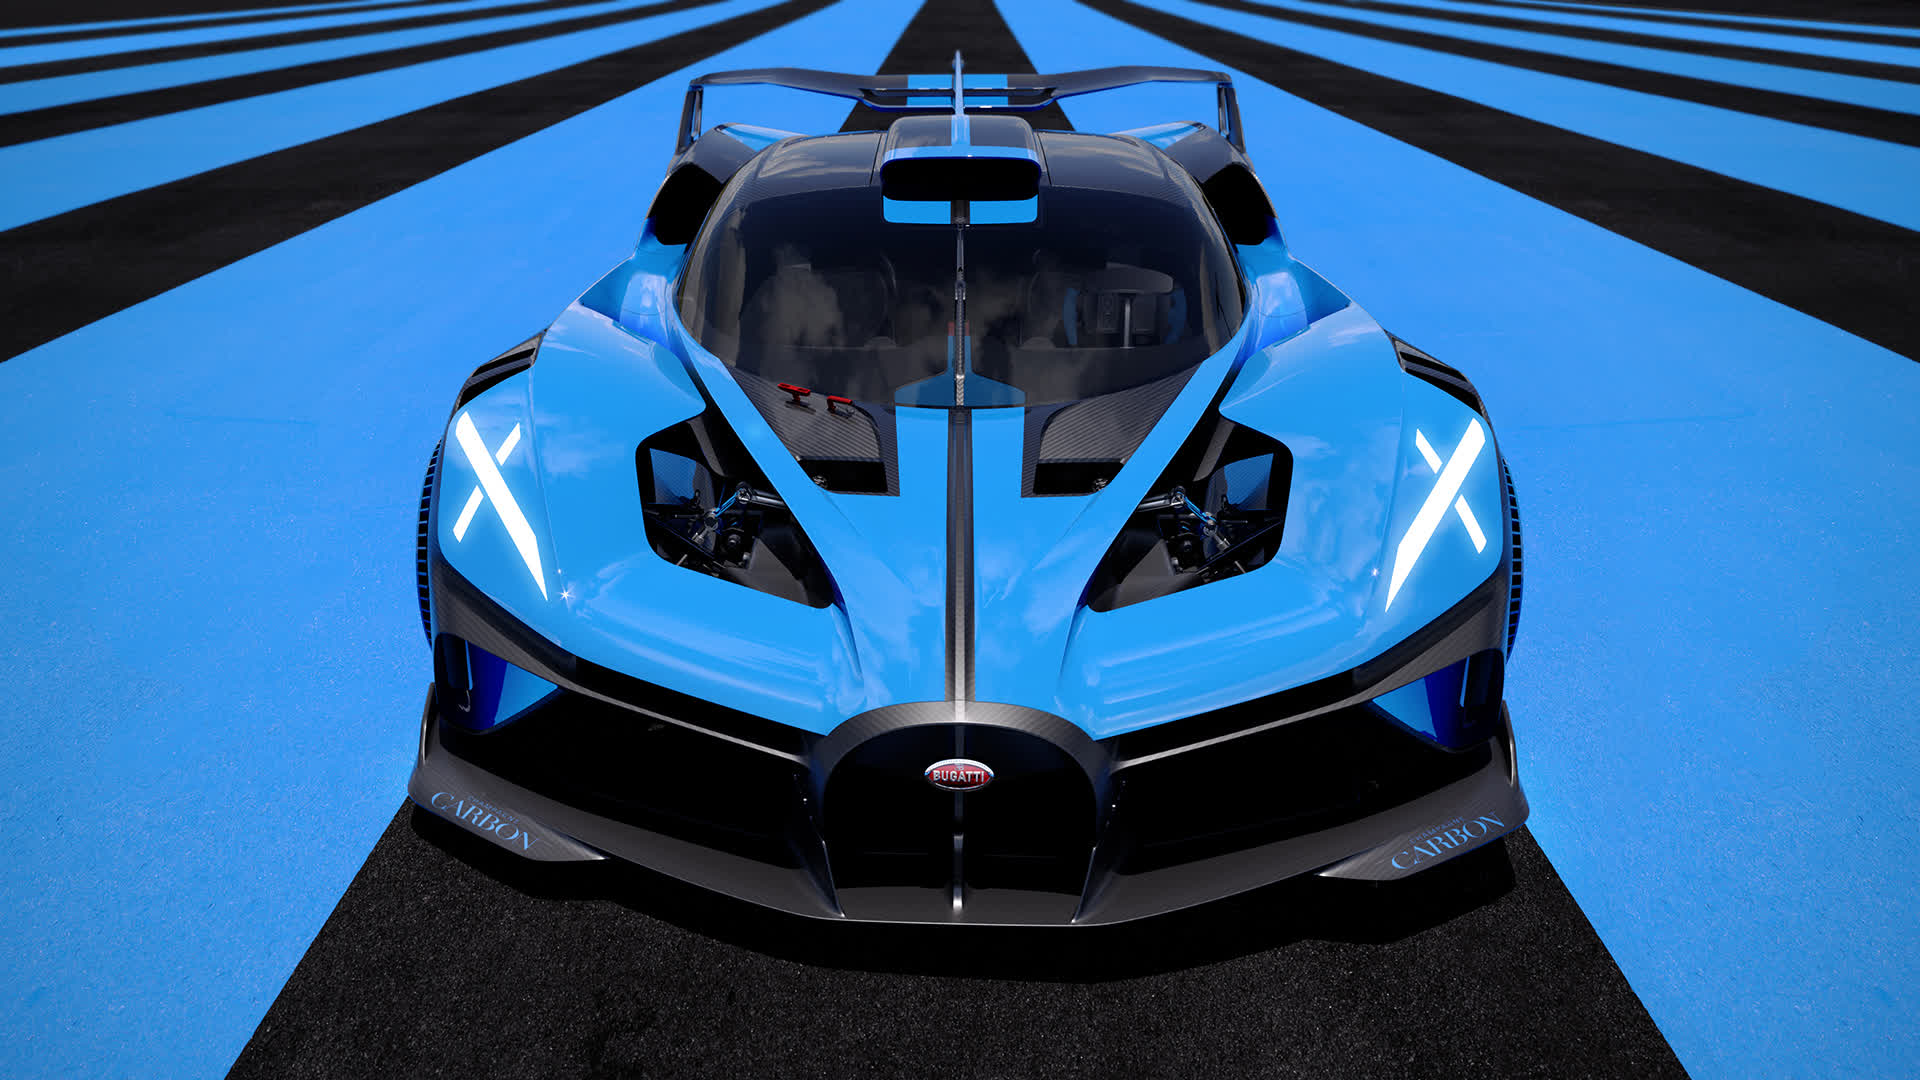 Bugatti's Bolide is a track-focused hypercar with 1,825 horsepower